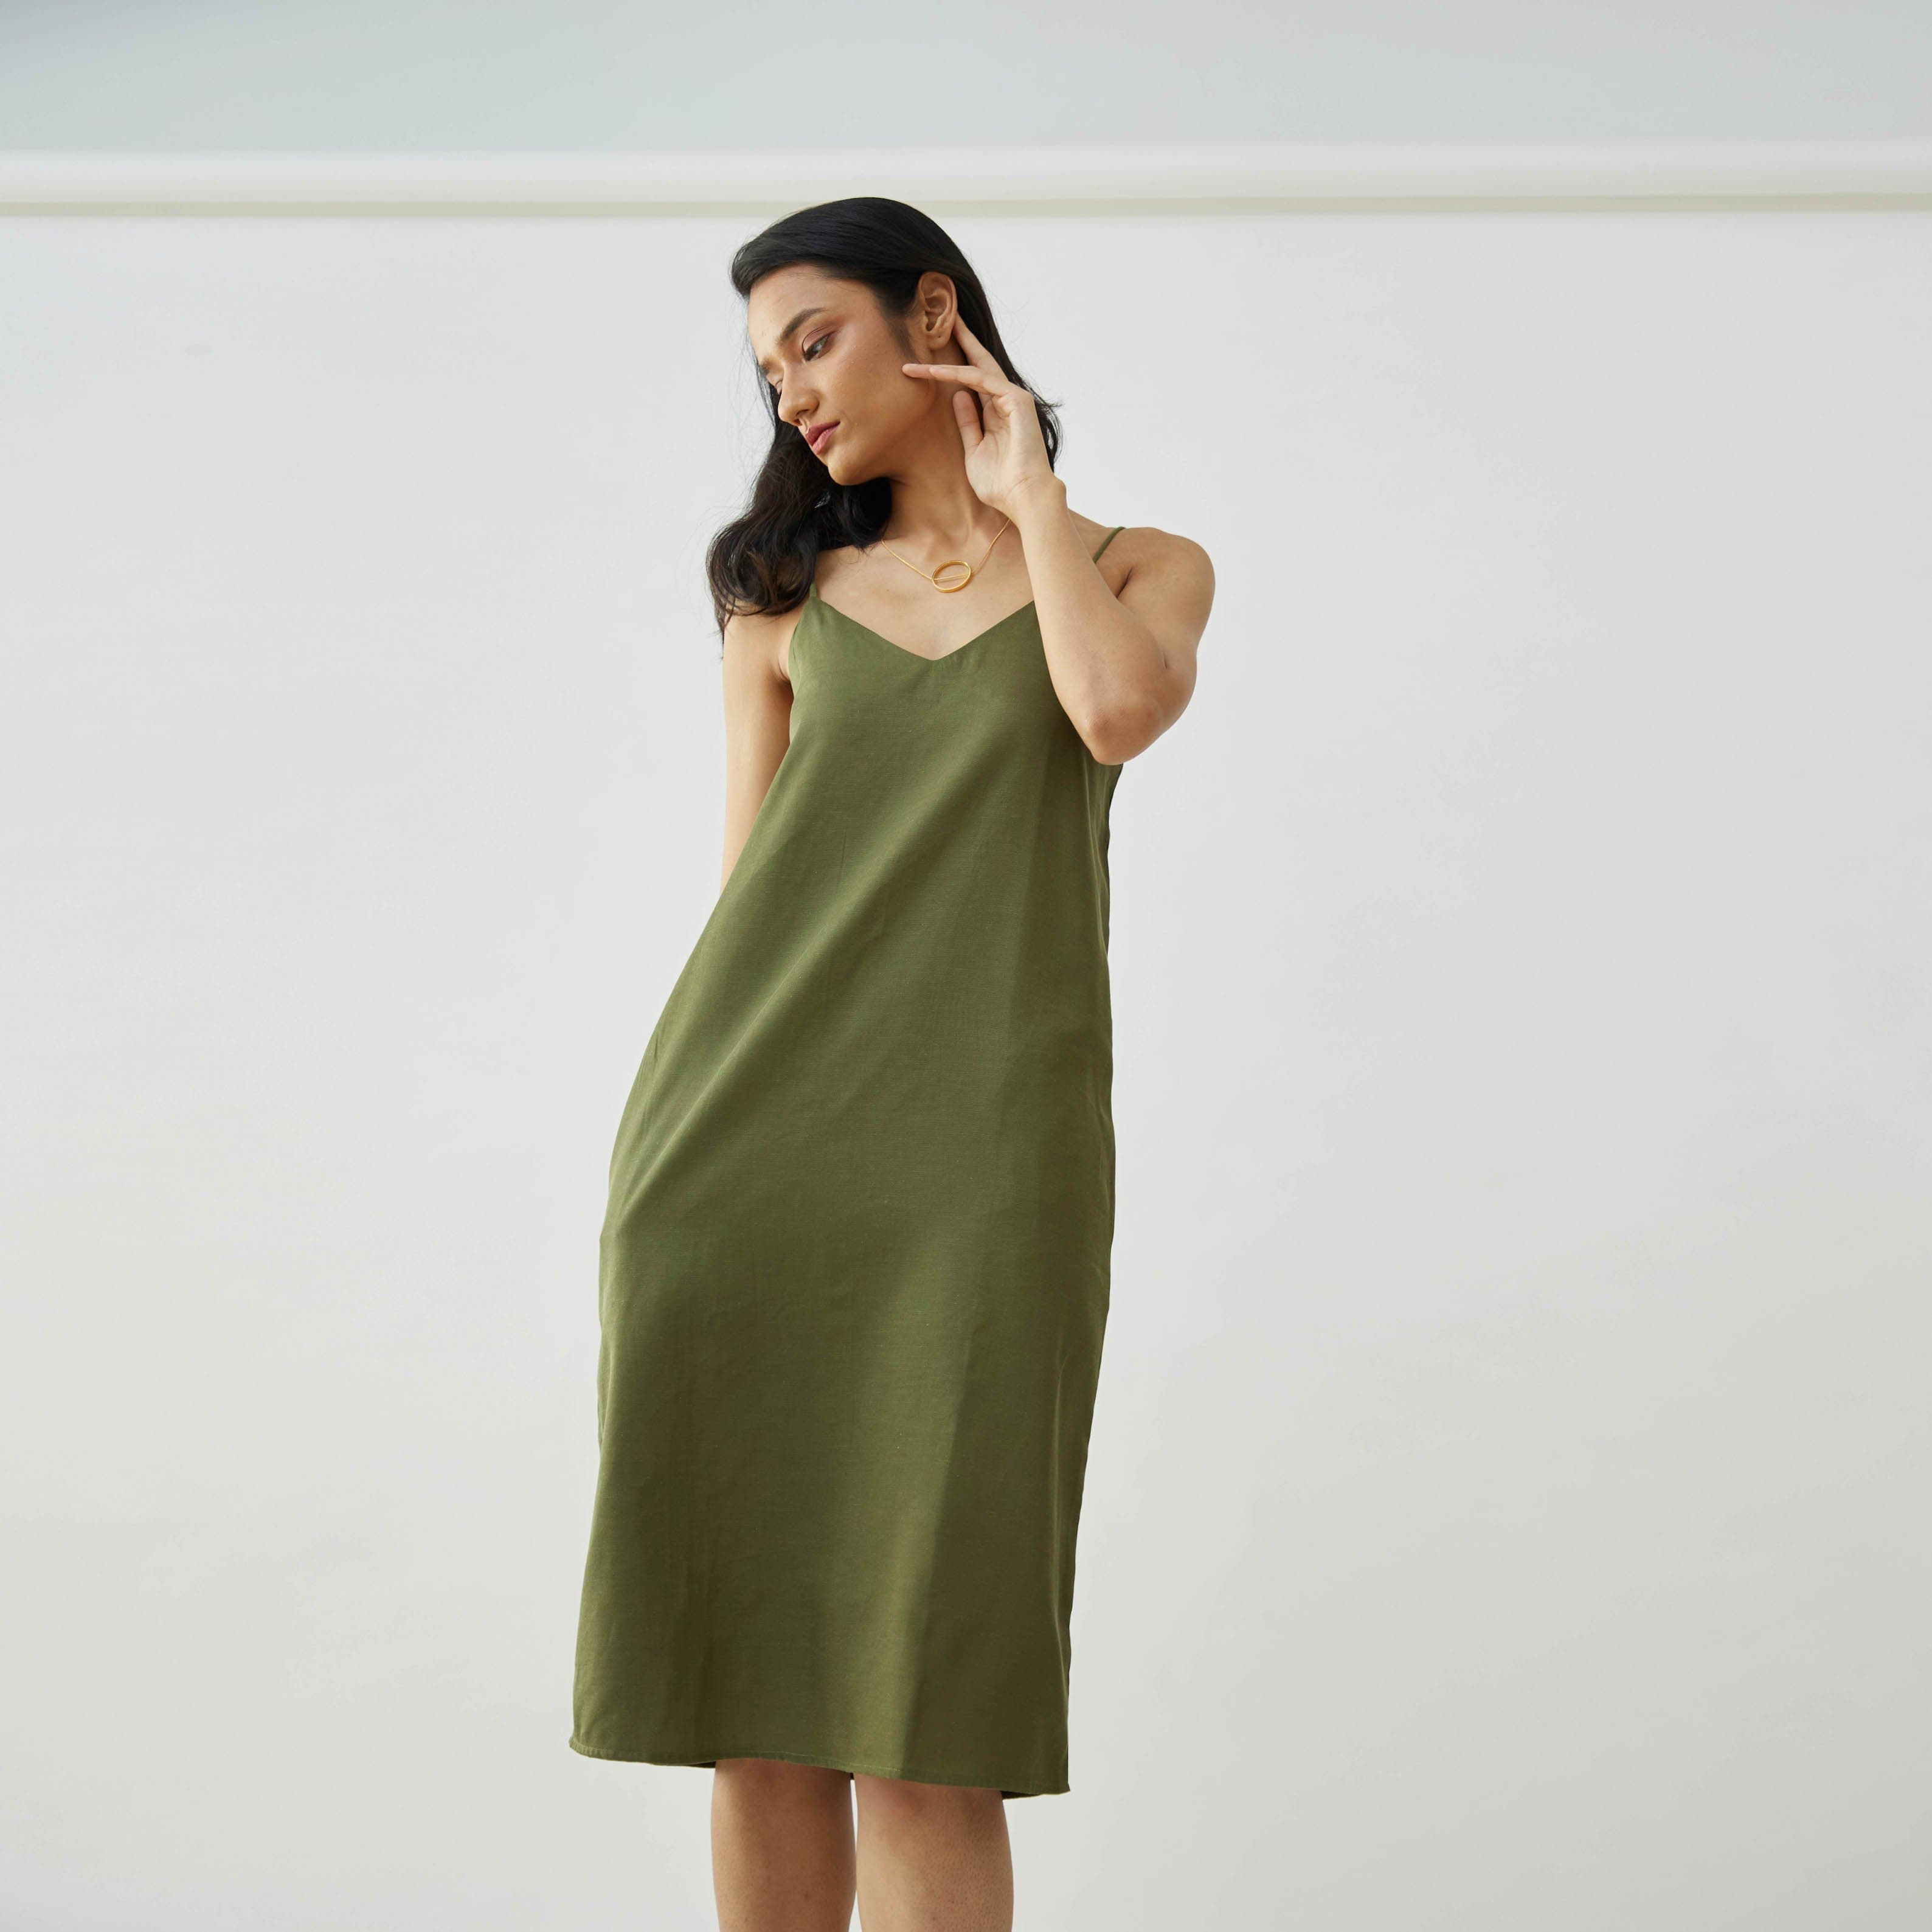 Saltpetre womens wear, indo-western slip dress in olive green for semi formal, casual, occassional wear.
 Comfortably elegant dress in indigo blue colour with delicate straps, back slit and side pockets.